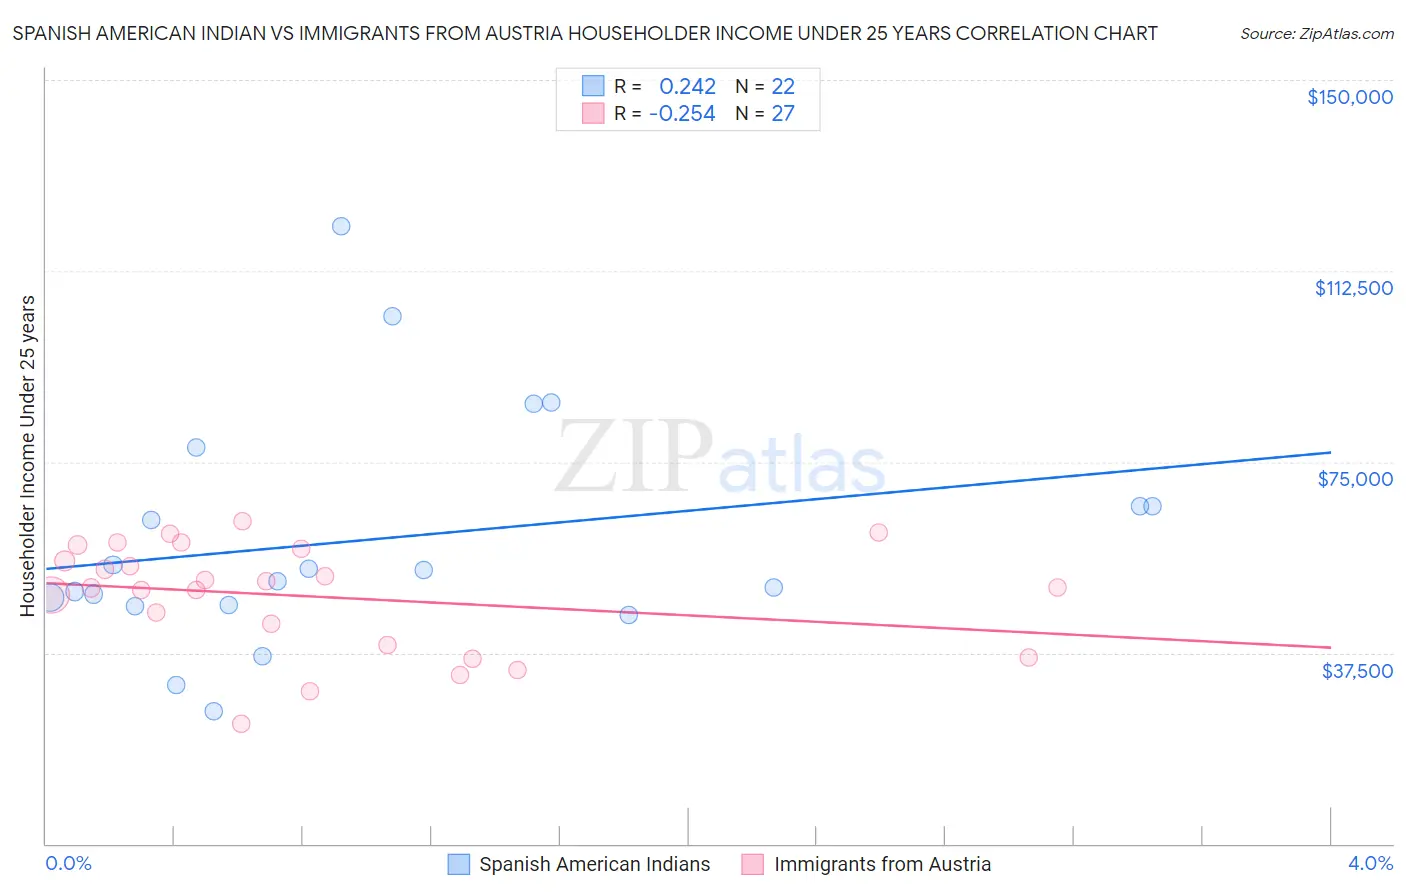 Spanish American Indian vs Immigrants from Austria Householder Income Under 25 years